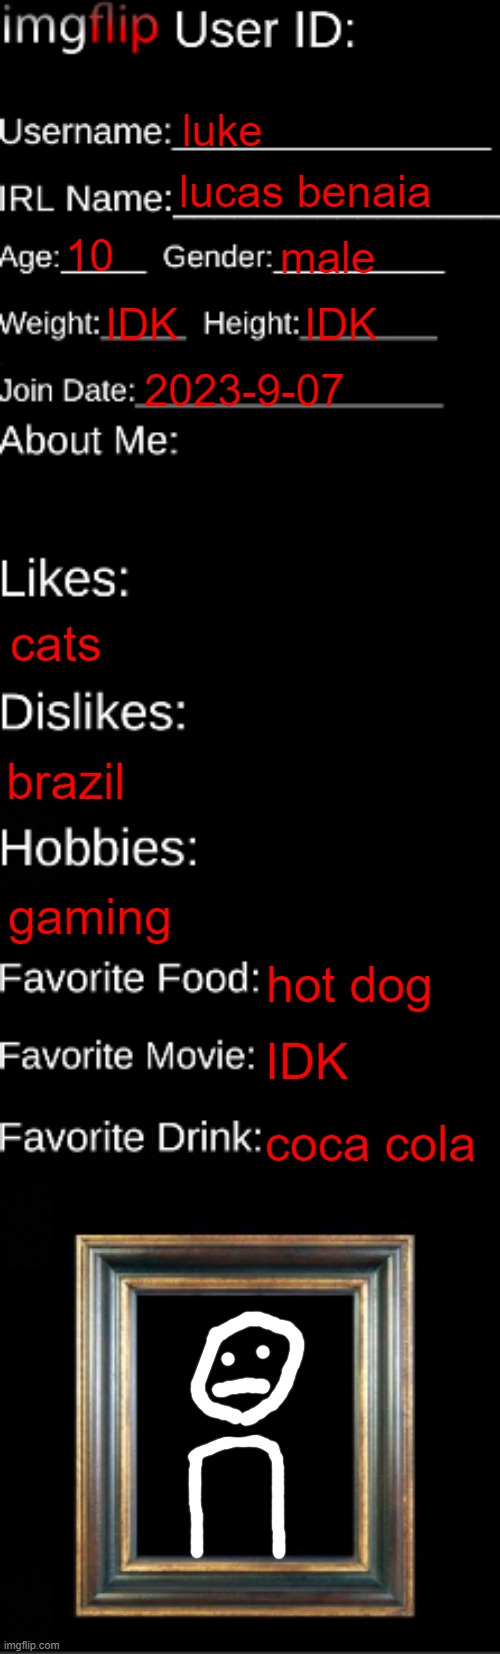 this is my IMD ID card | luke; lucas benaia; 10; male; IDK; IDK; 2023-9-07; cats; brazil; gaming; hot dog; IDK; coca cola | image tagged in imgflip id card,me | made w/ Imgflip meme maker